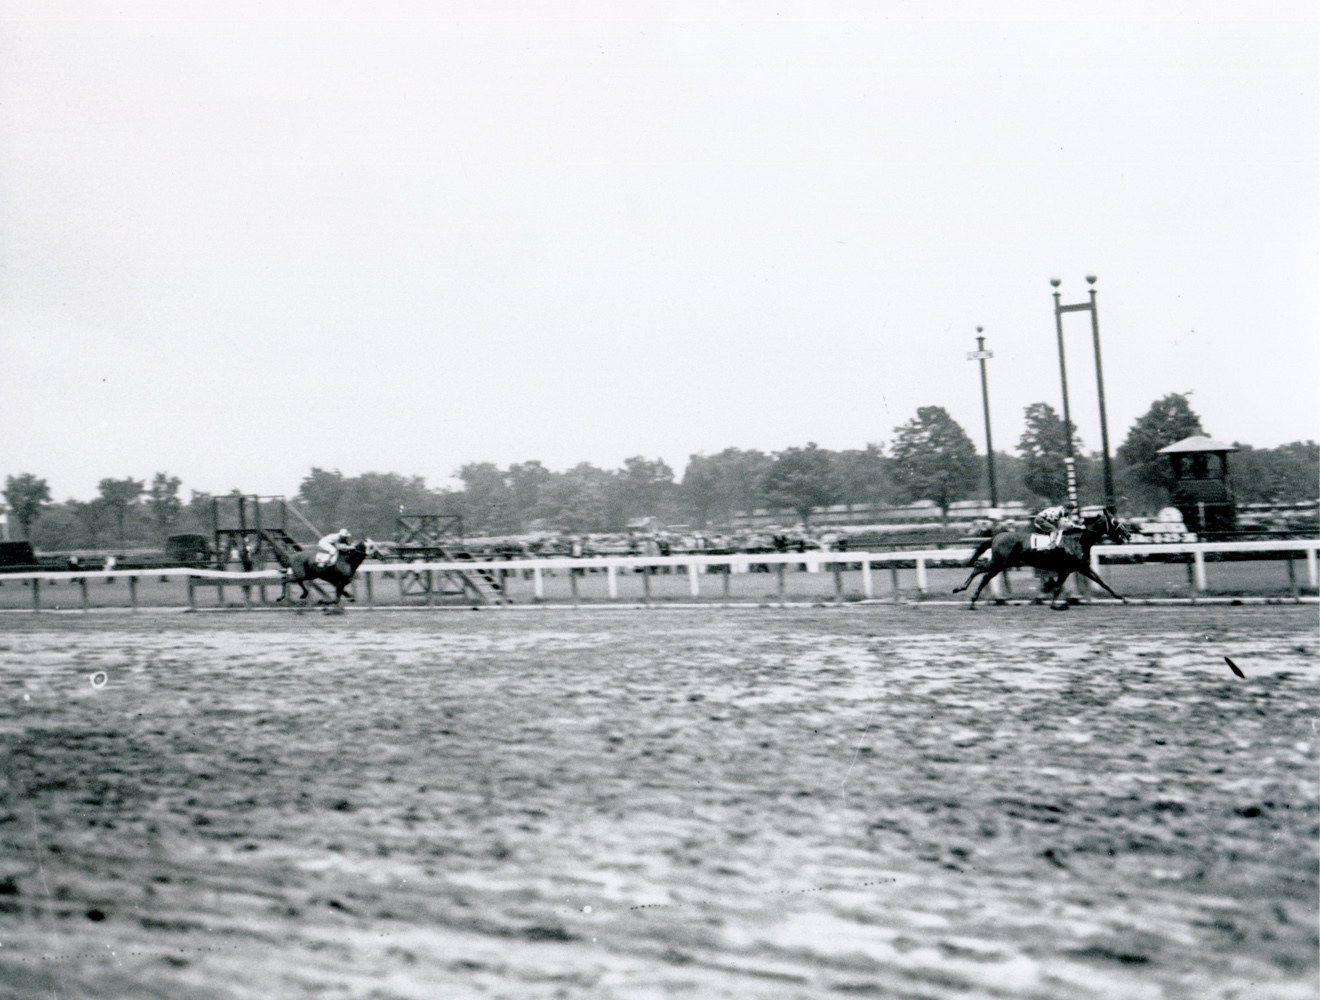 Granville (James Stout up) defeating Discovery in the 1936 Saratoga Cup by eight lengths (Keeneland Library Cook Collection/Museum Collection)